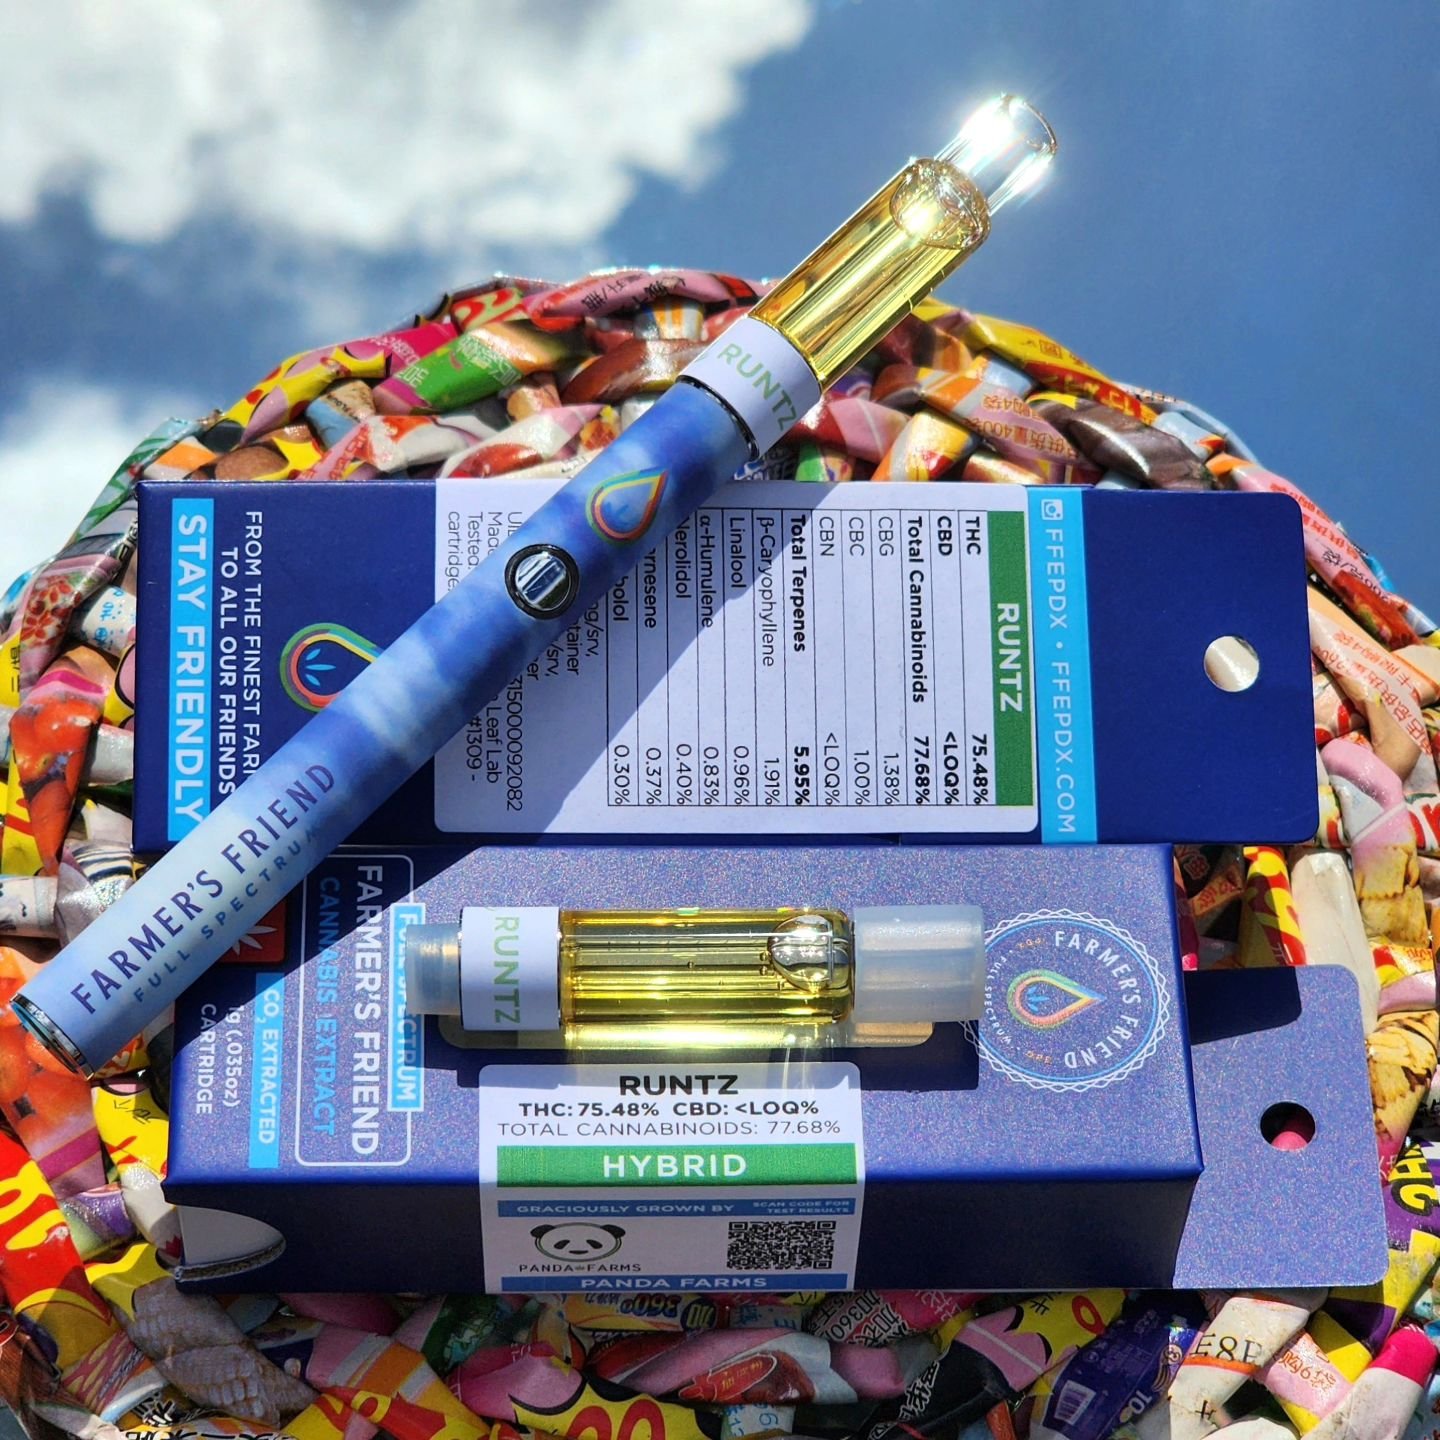 We're stoked to be working with Panda Farms, and we think you'll be super happy about with our first collaboration- Runtz cartridges! Runtz is a cross of Gelato 33 x Zkittle, bringing the positive vibes we all could use. Get ready to giggle and have 